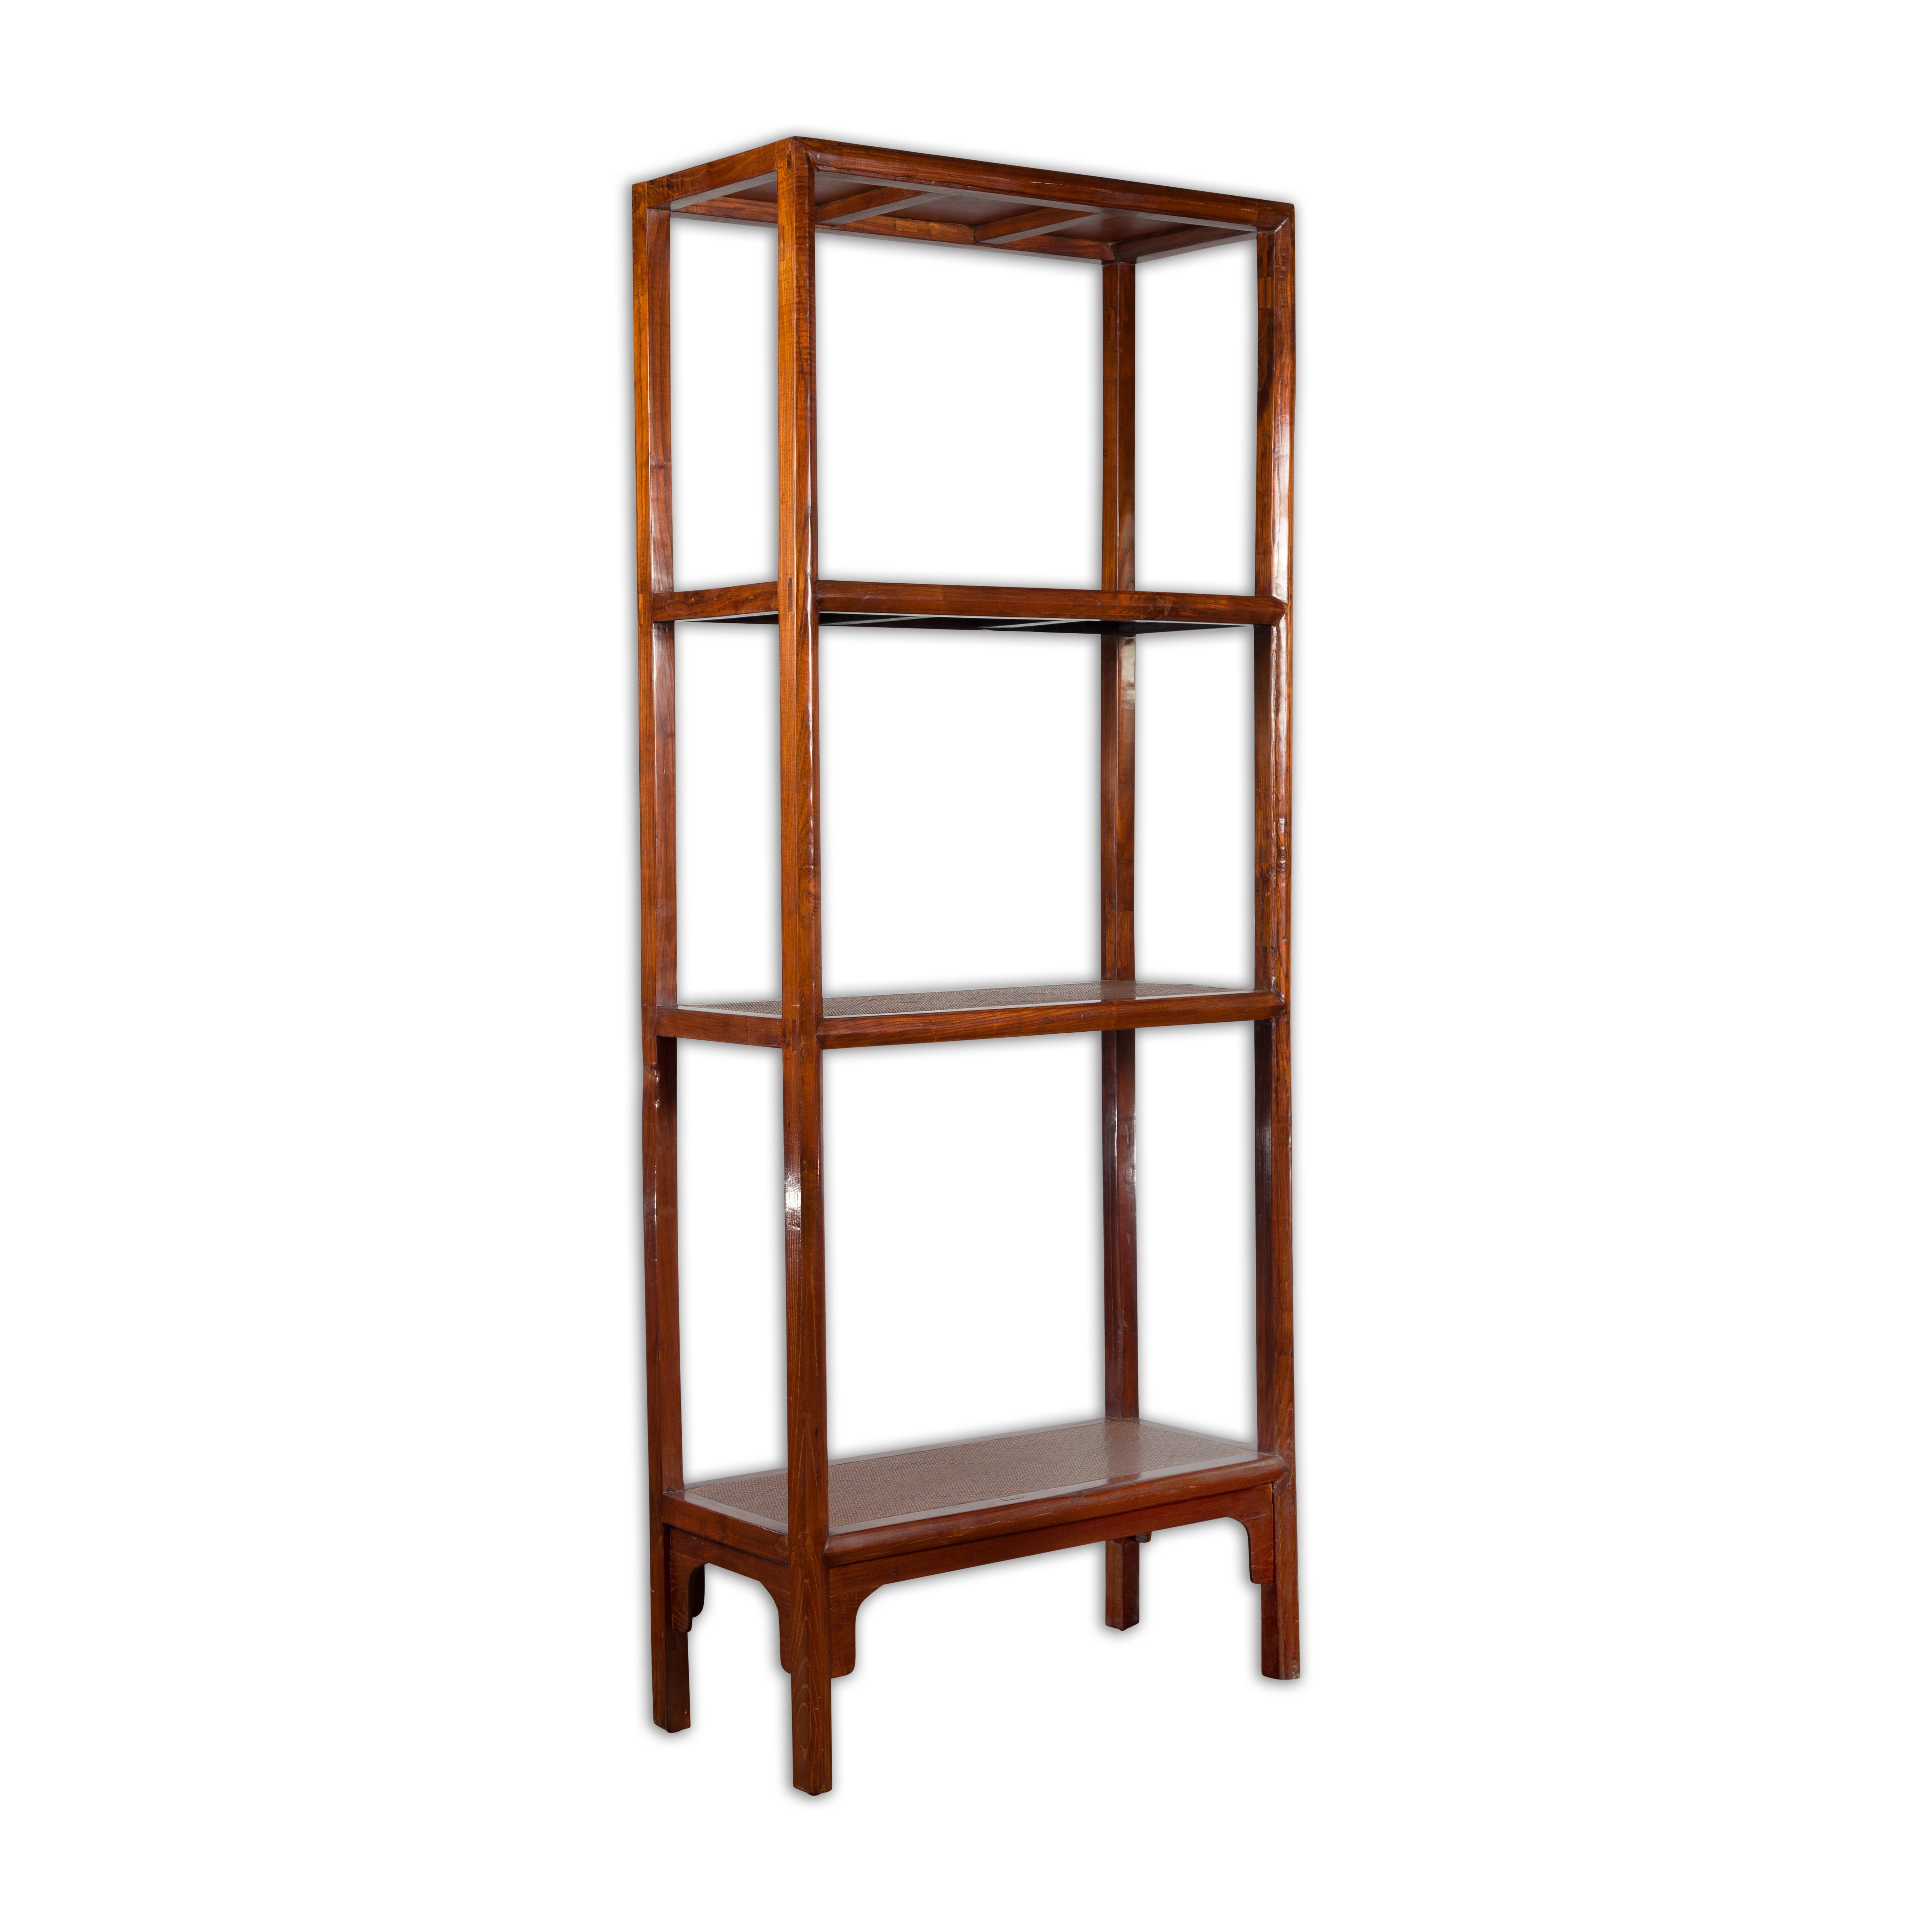 Chinese Early 20th Century Wooden Bookcase with Woven Rattan Shelves and Apron For Sale 8